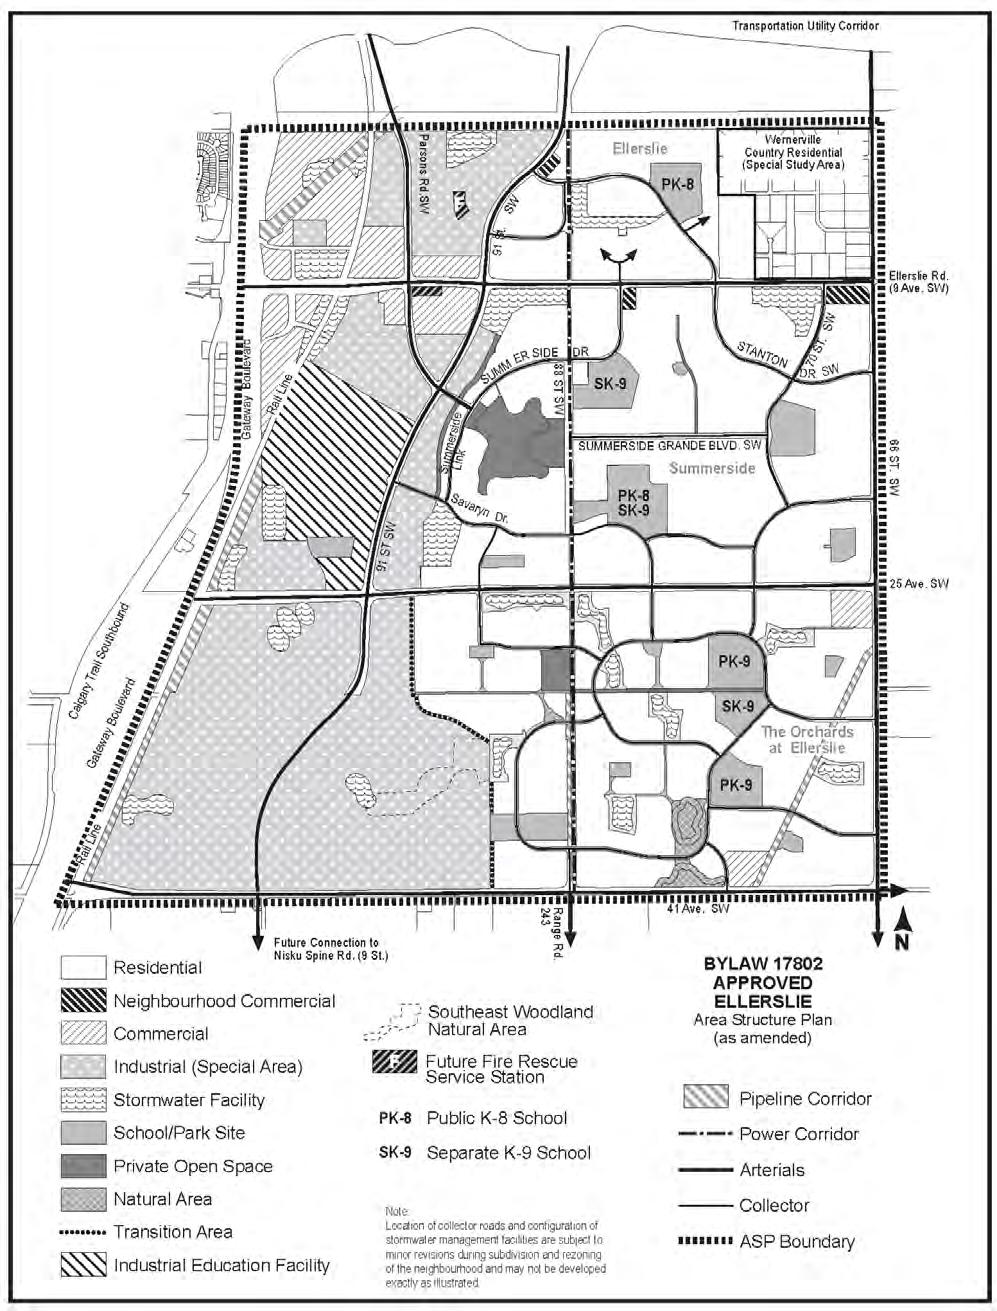 Ellerslie Area Structure Plan (As amended by Bylaw 17802, January 23,